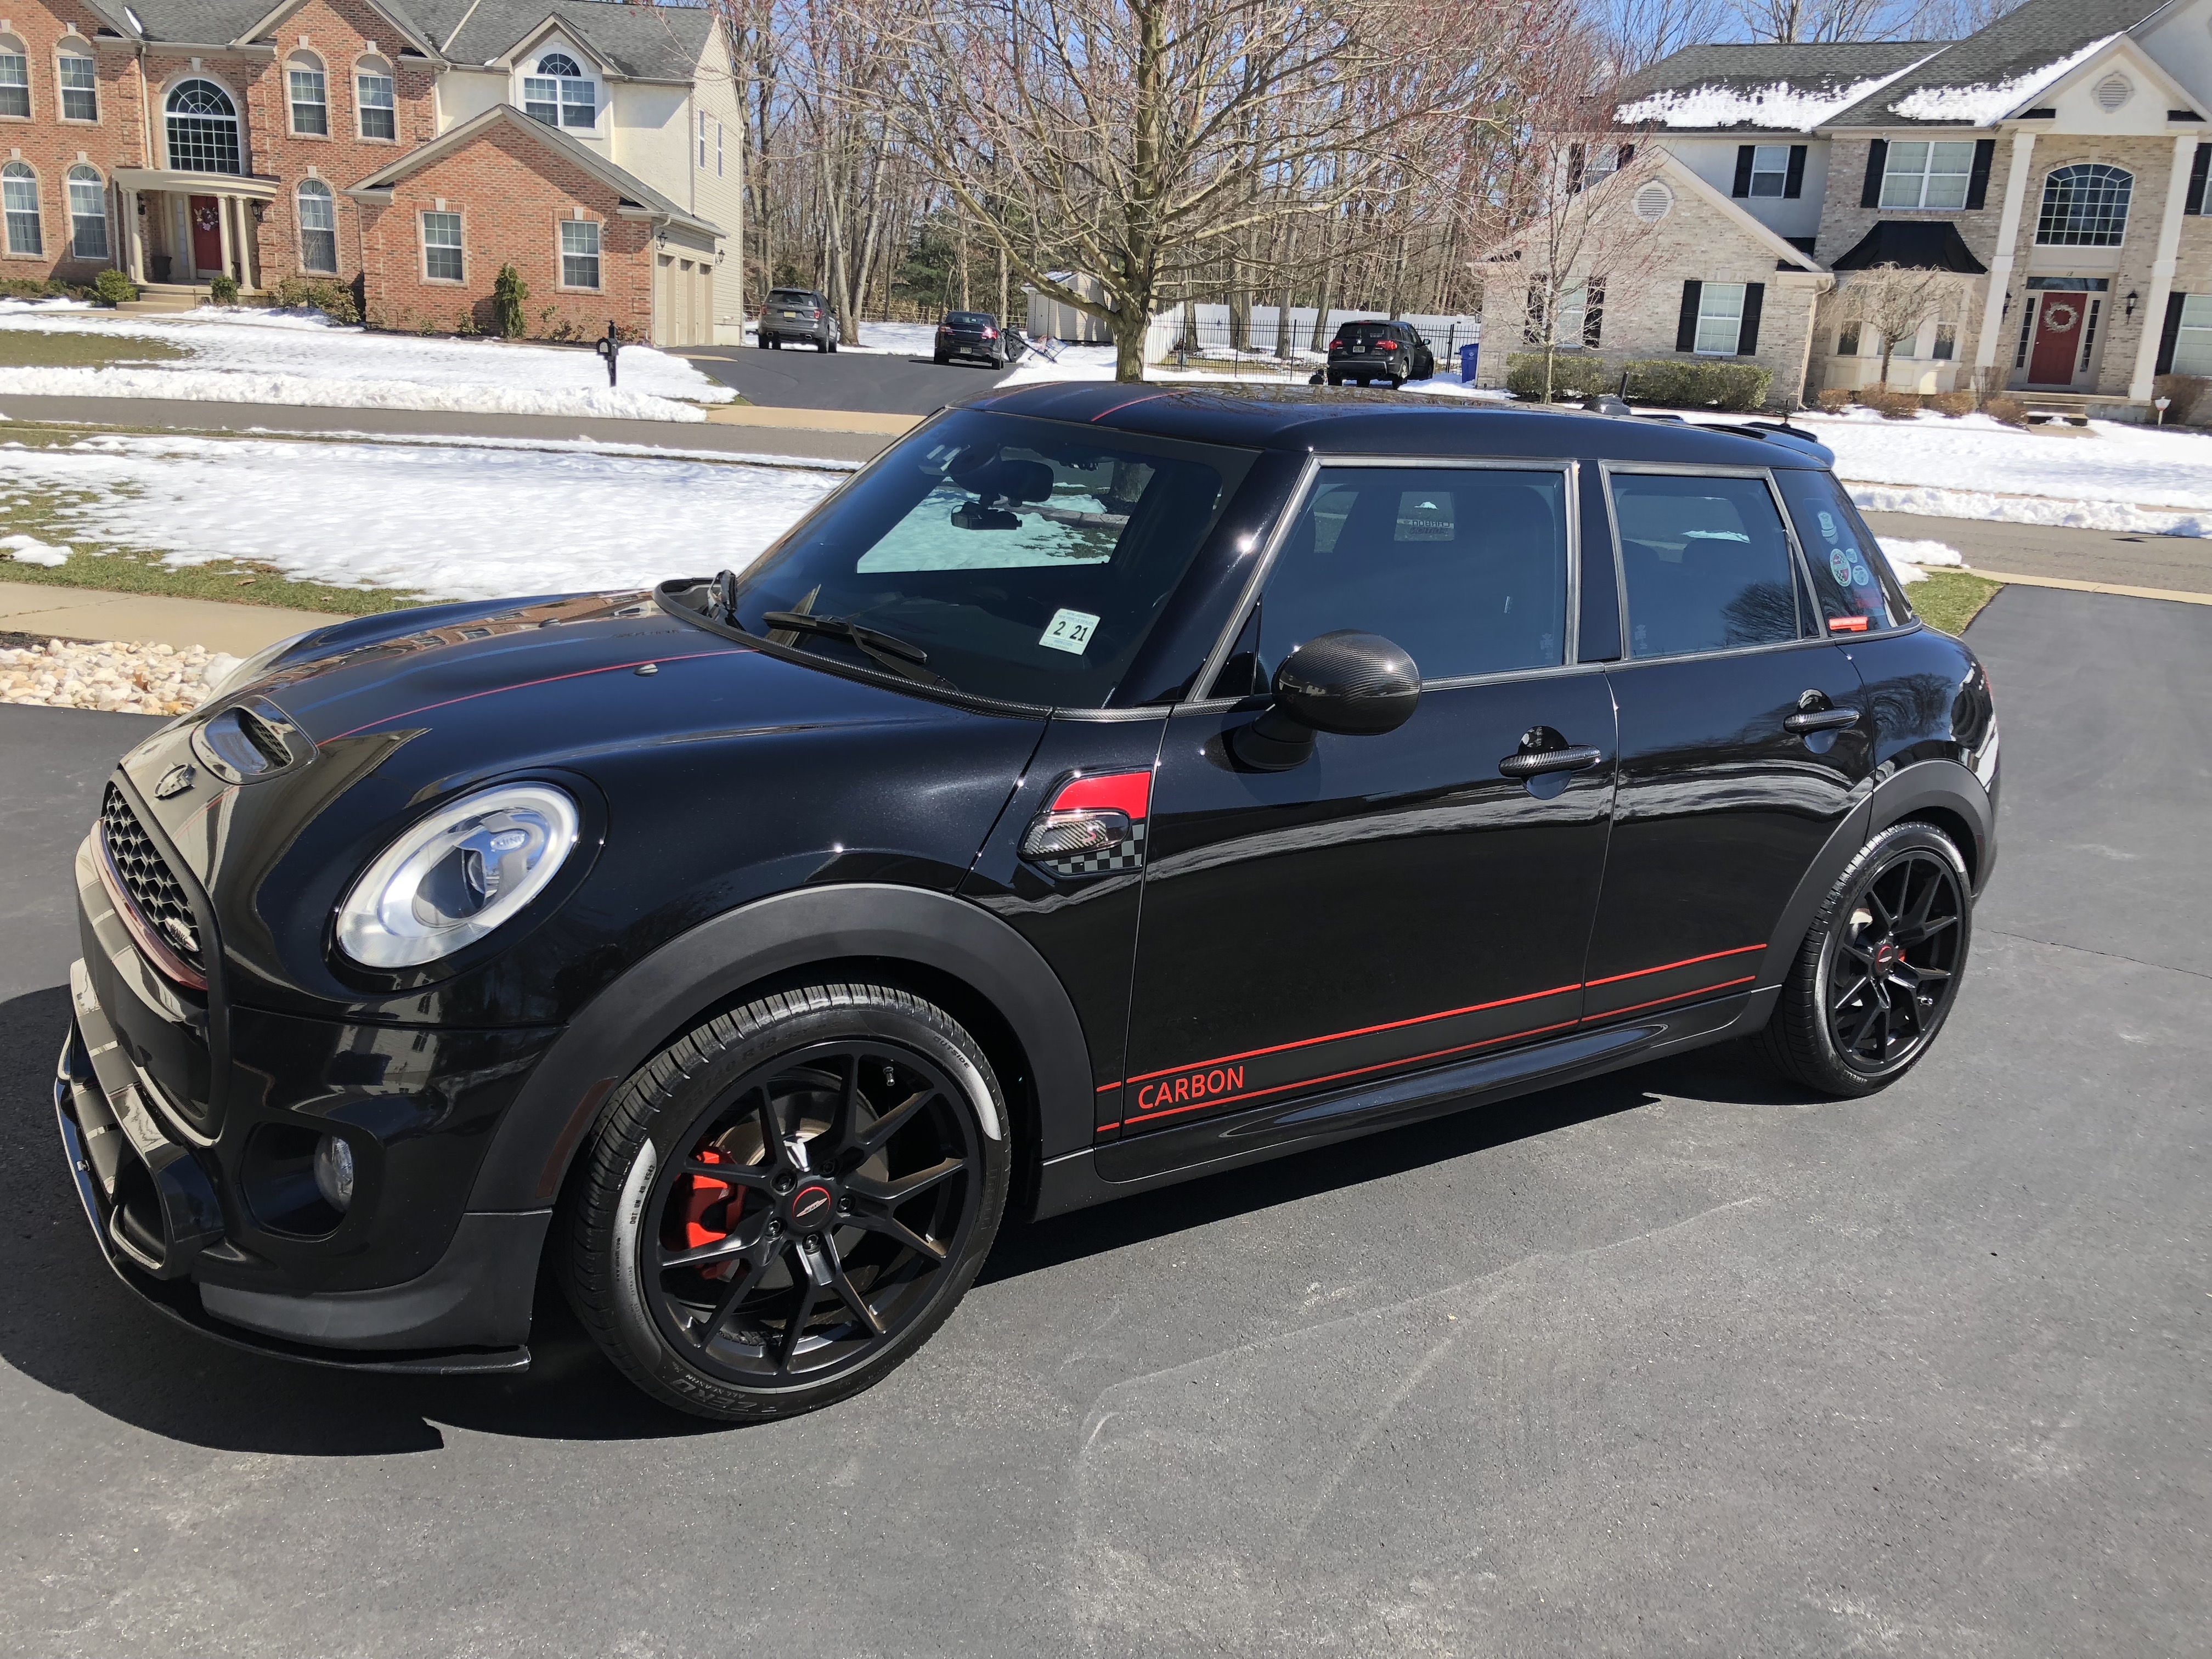 F55/F56 F55 Picture Thread - Page 2 - North American Motoring